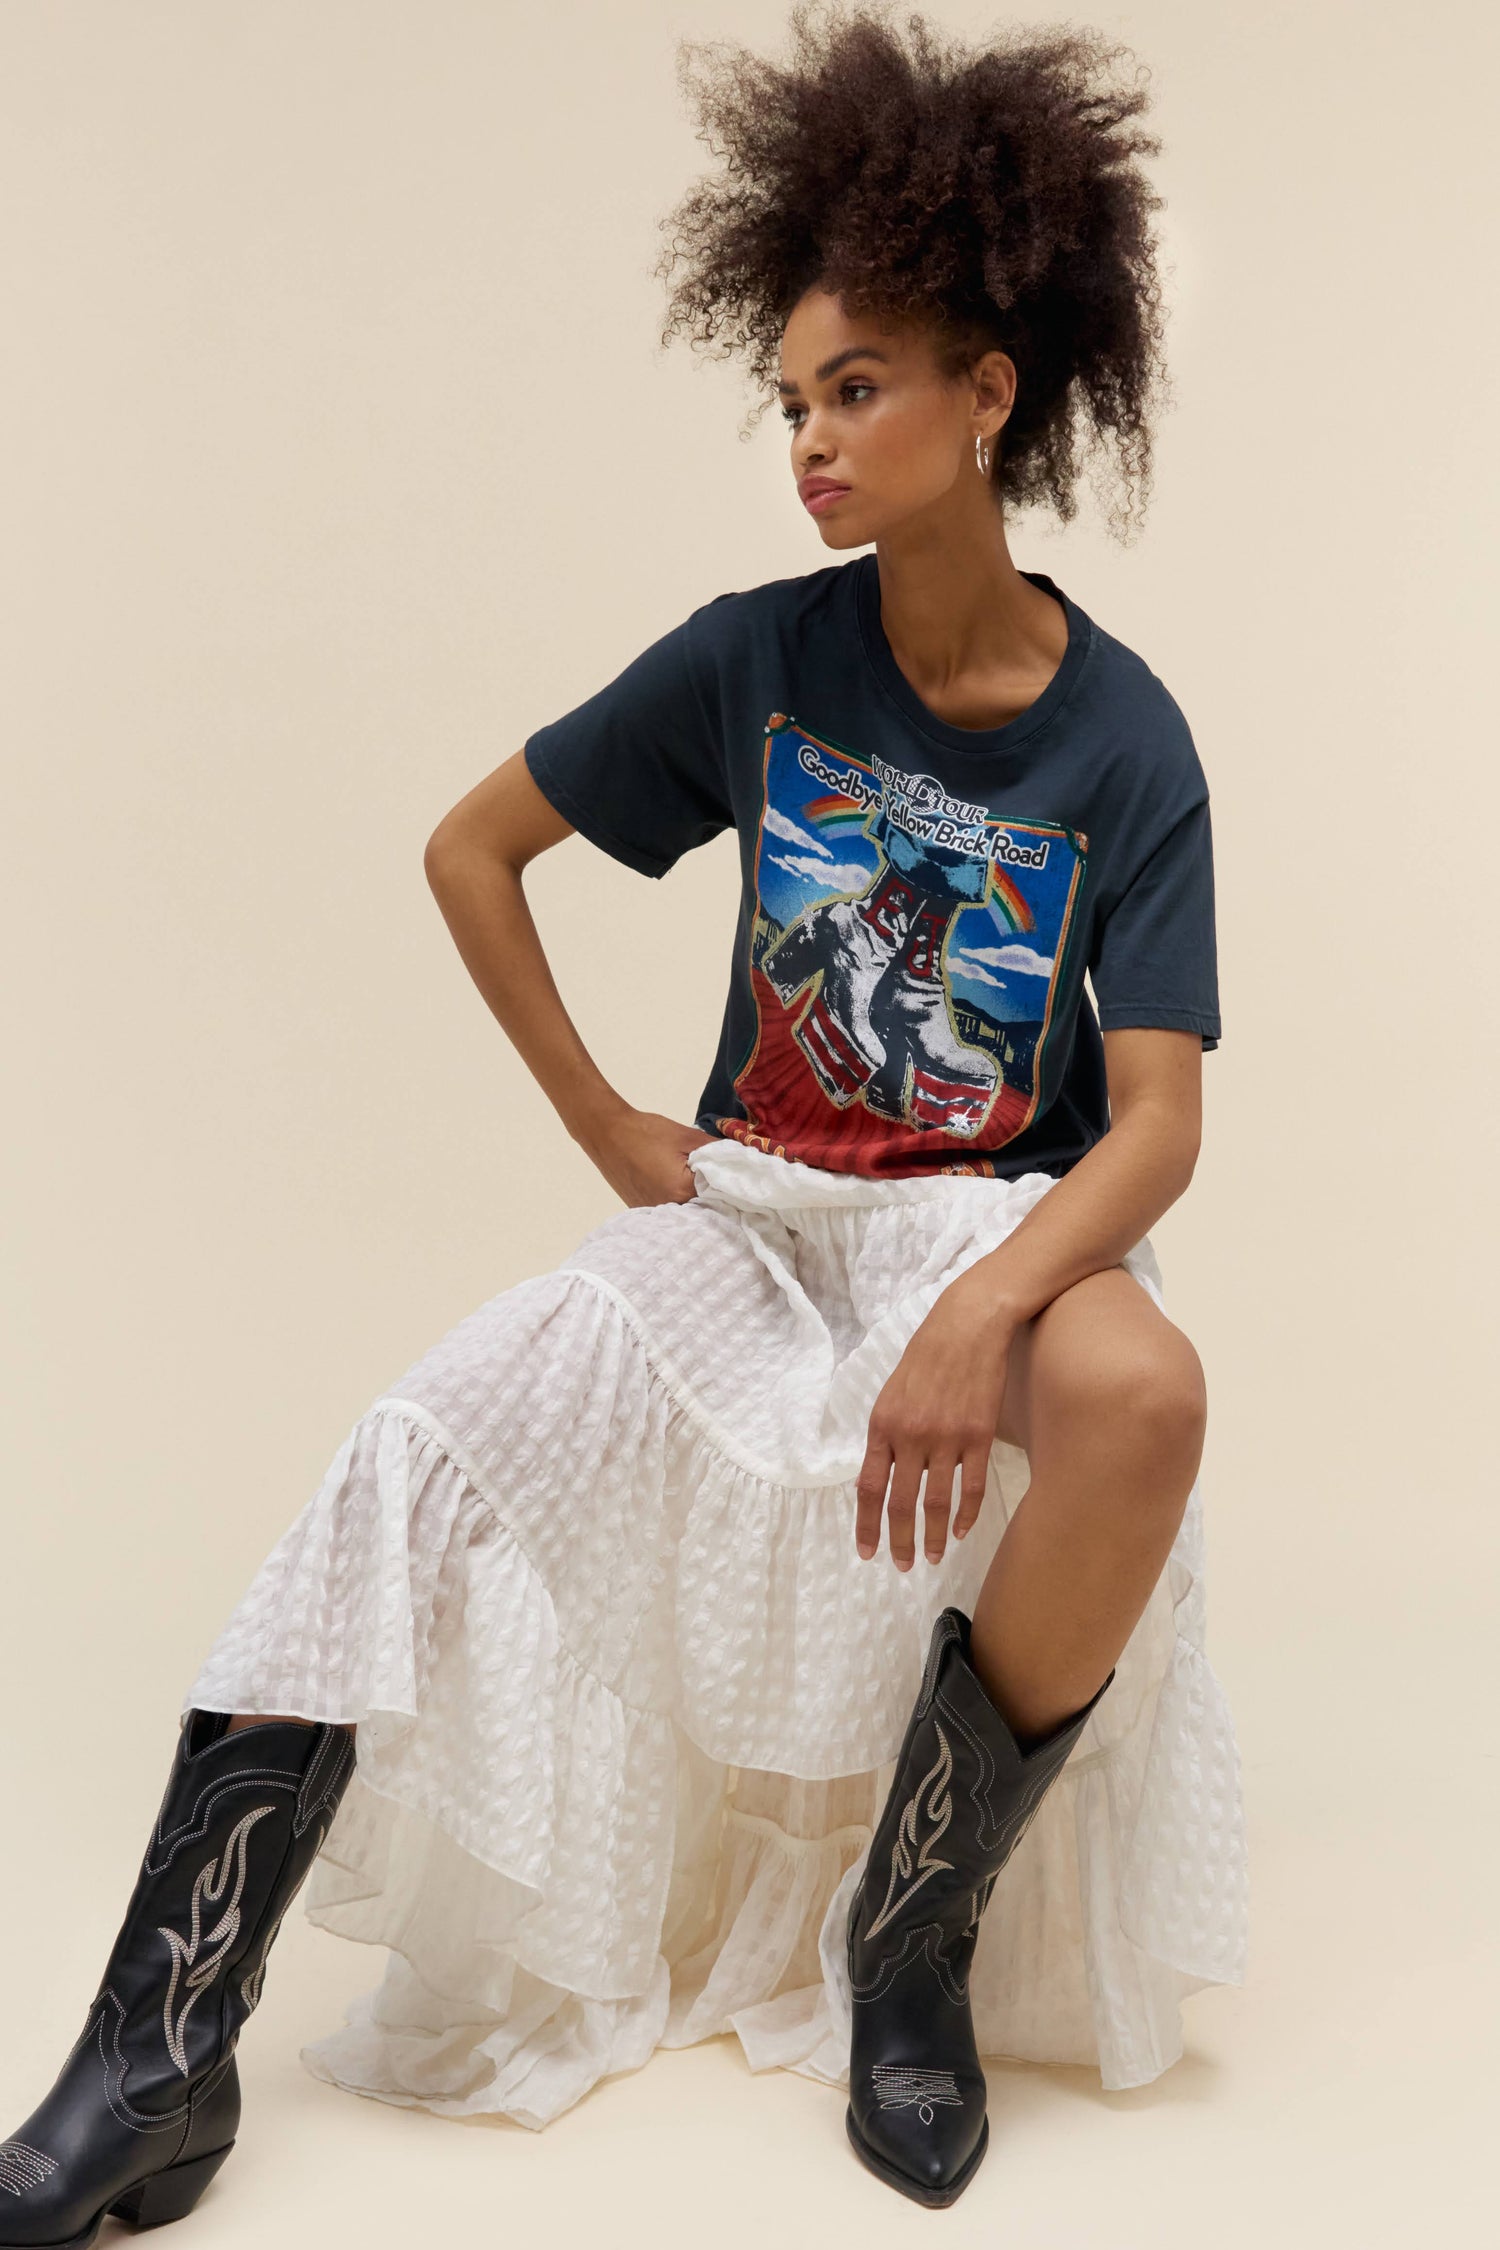 A model featuring a black boyfriend tee designed with a graphic boots in front and stamped with 'Elton John'.